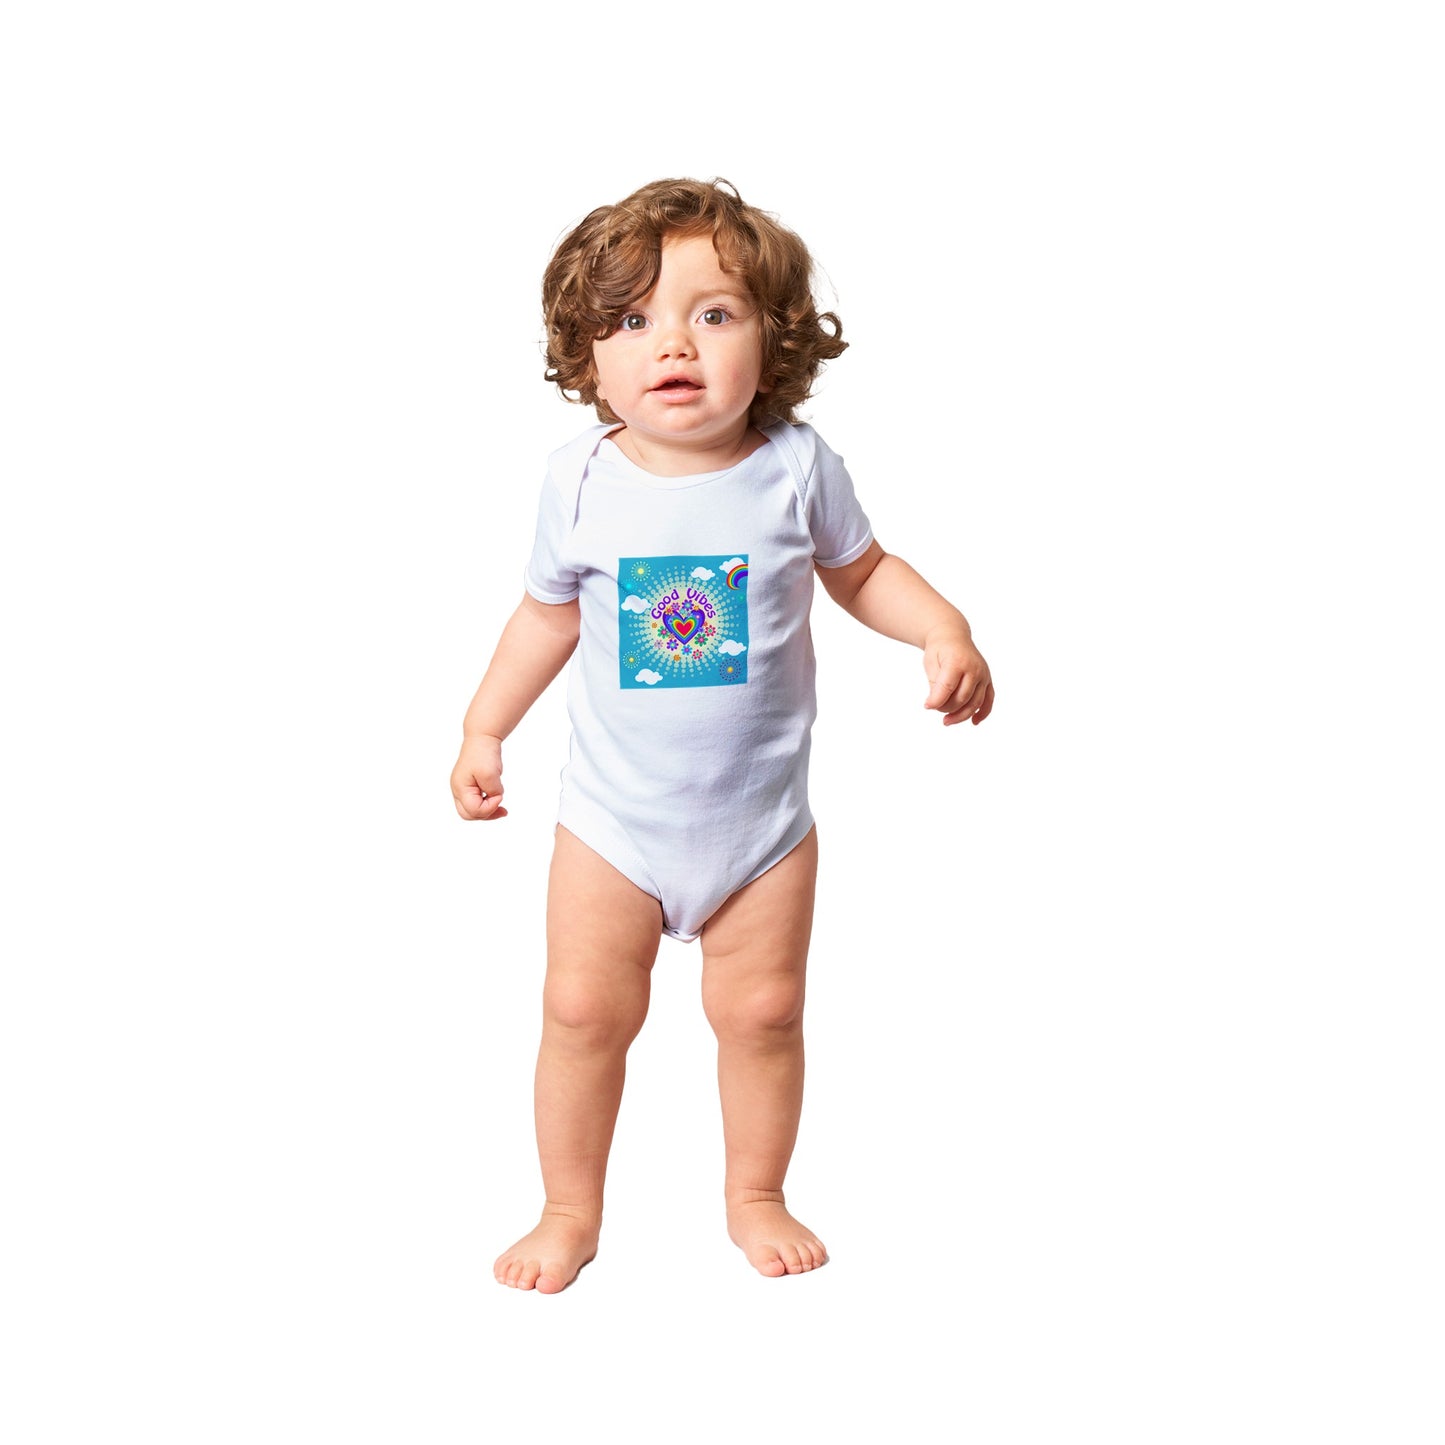 Organic cotton baby bodysuit/Good-Vibes-Only - Classic